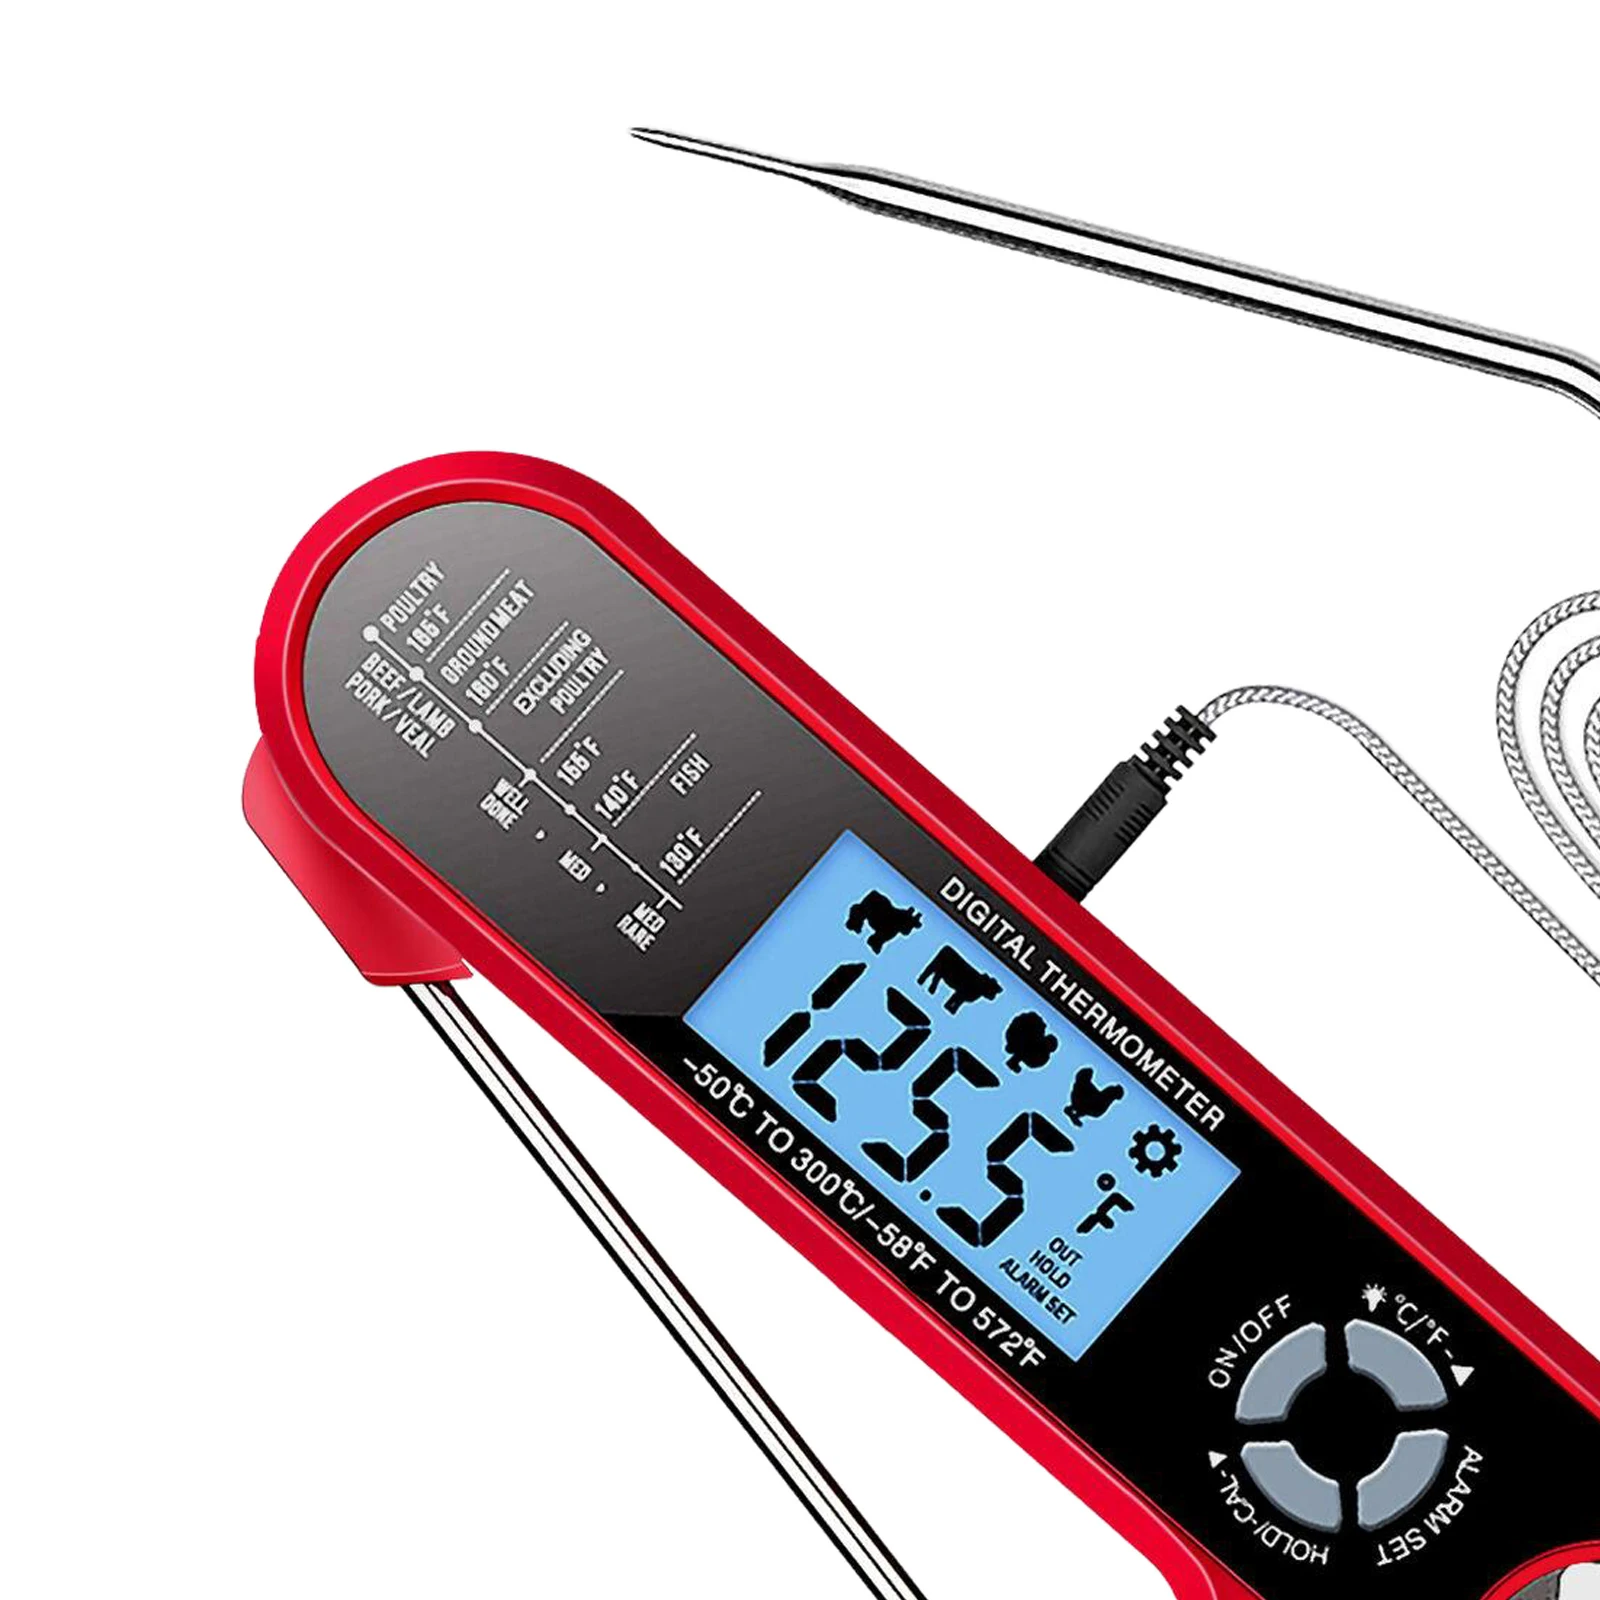 

Digital Food Thermometer Instant Read Meat Thermometer for Cooking BBQ Grilling Smoking, Baking, Turkey, Milk with Dual Probe